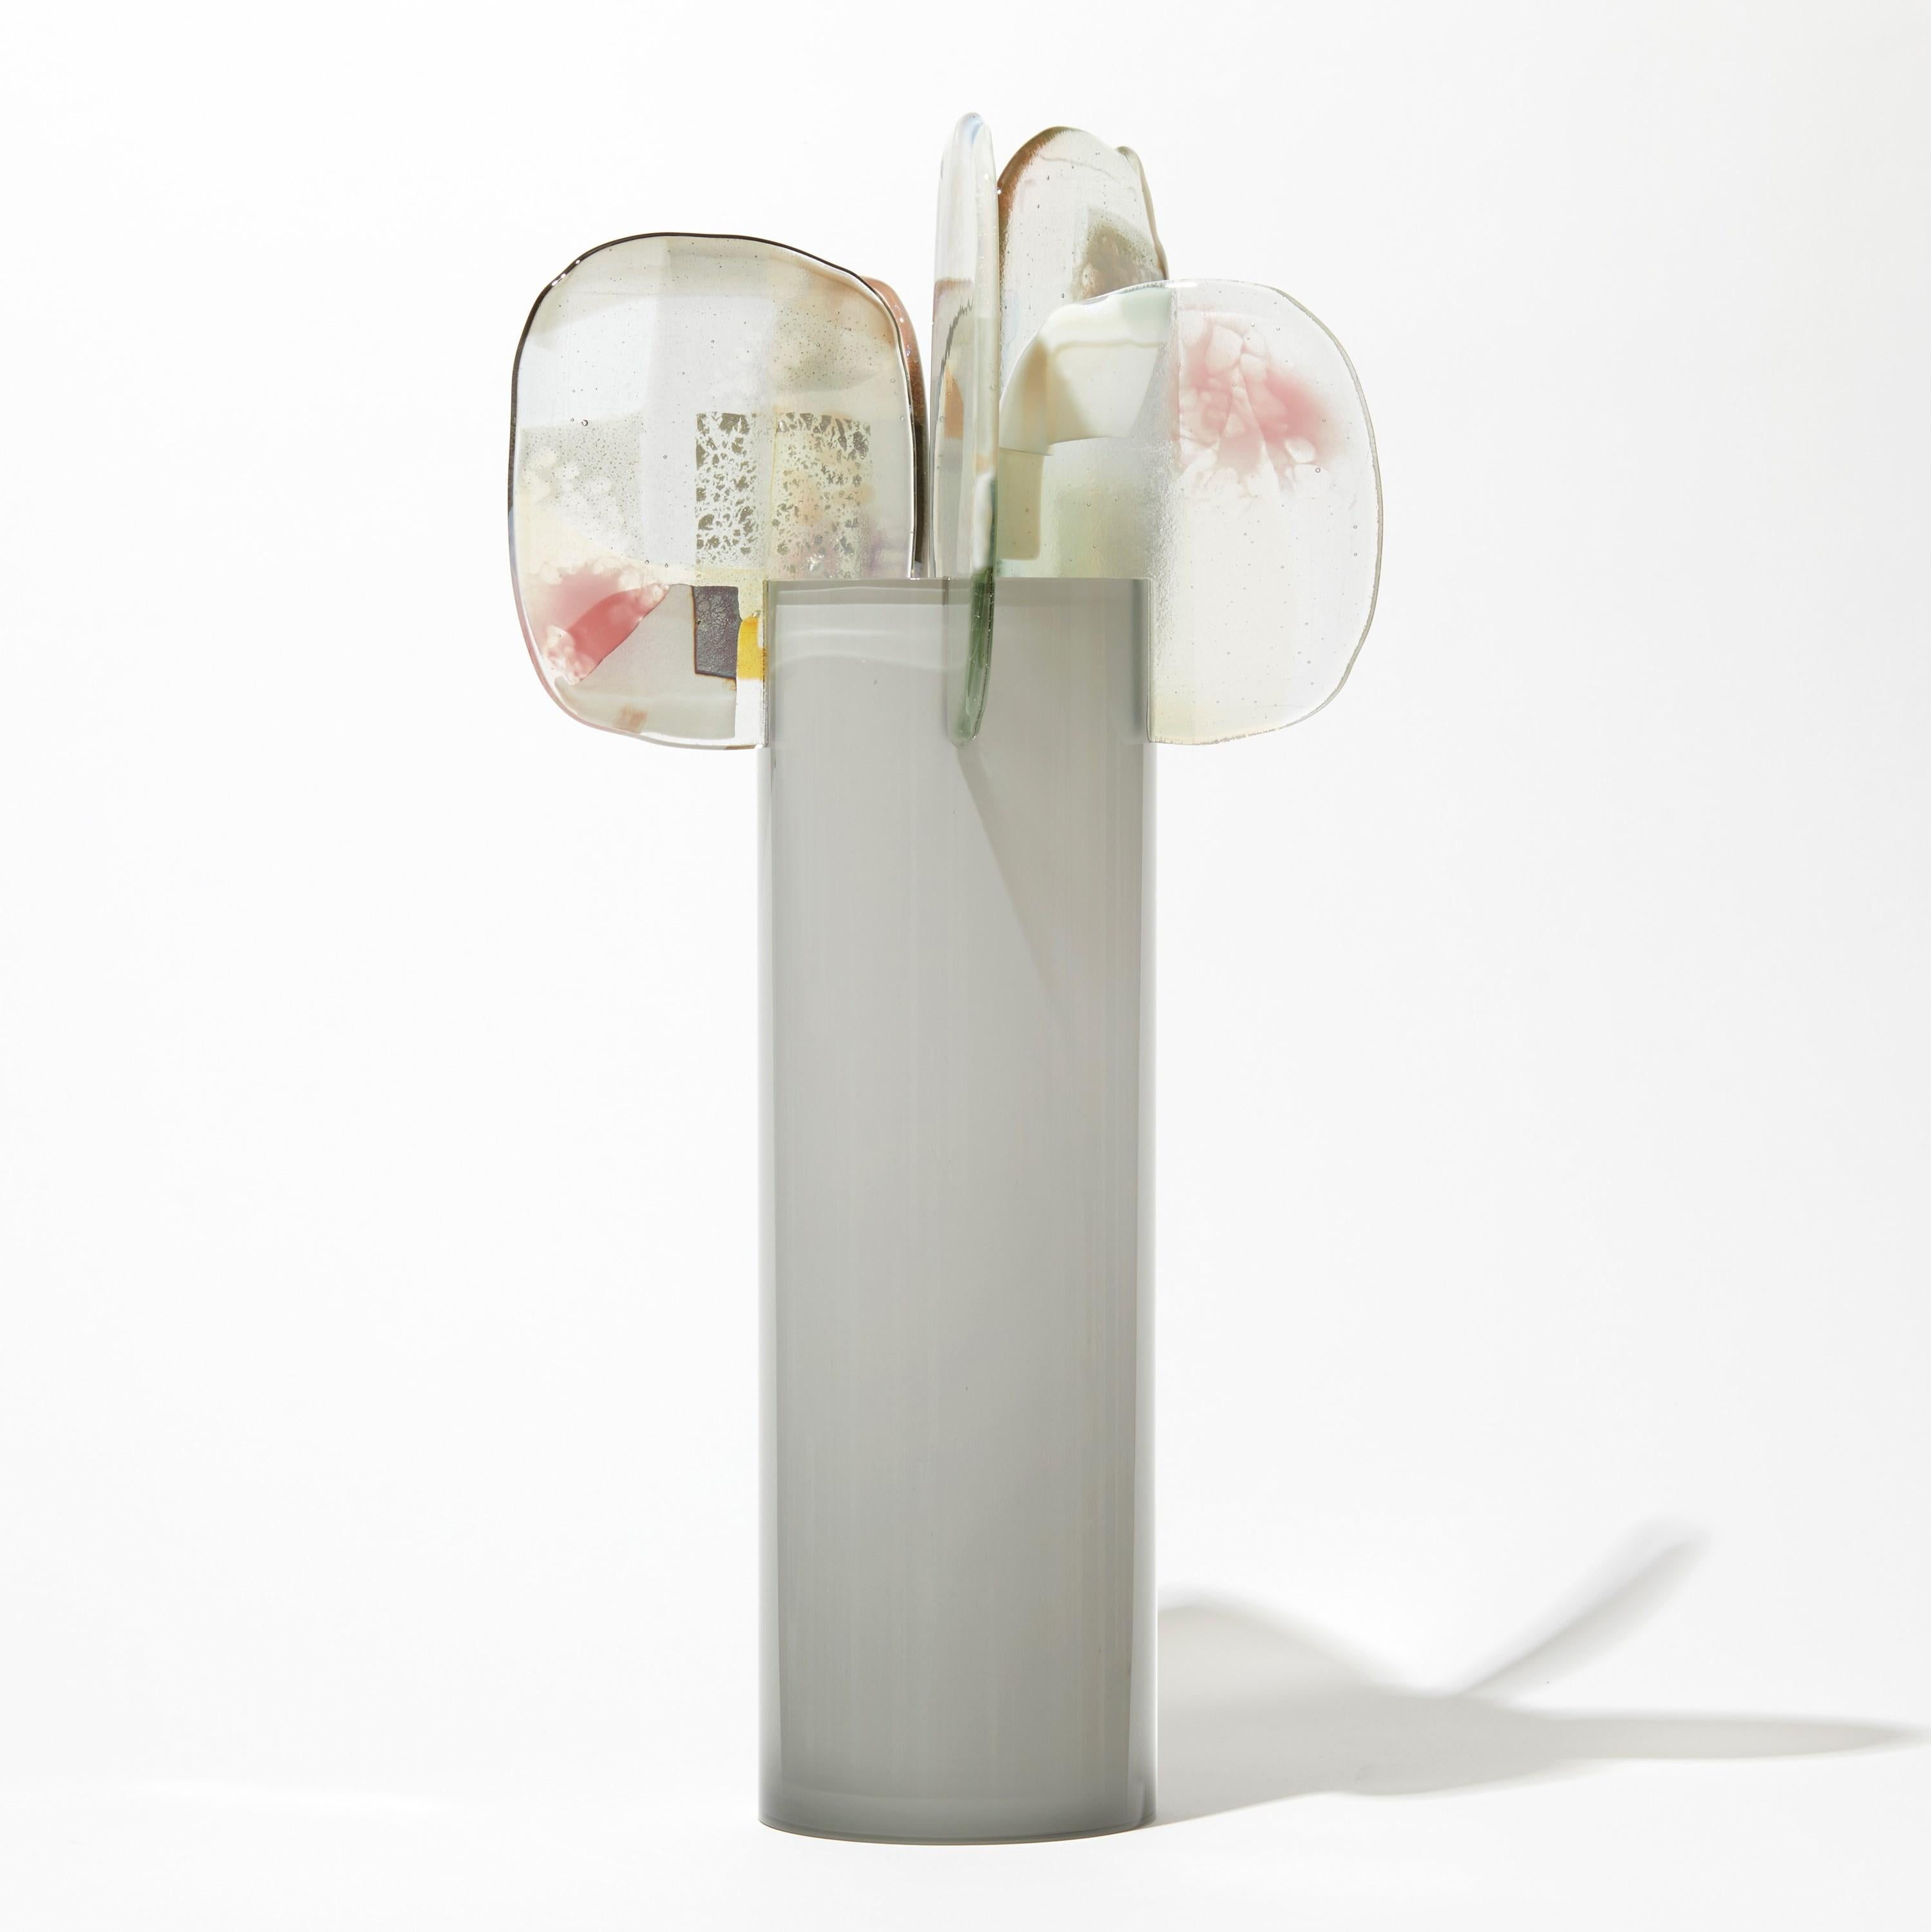 ''Paradise 06 in Moonstone'' is a unique glass sculpture created using hybrid hand-made glass techniques by the British artist Amy Cushing. Combining mouth blown glass with kiln formed glass, each piece within the collection displays a multiple of